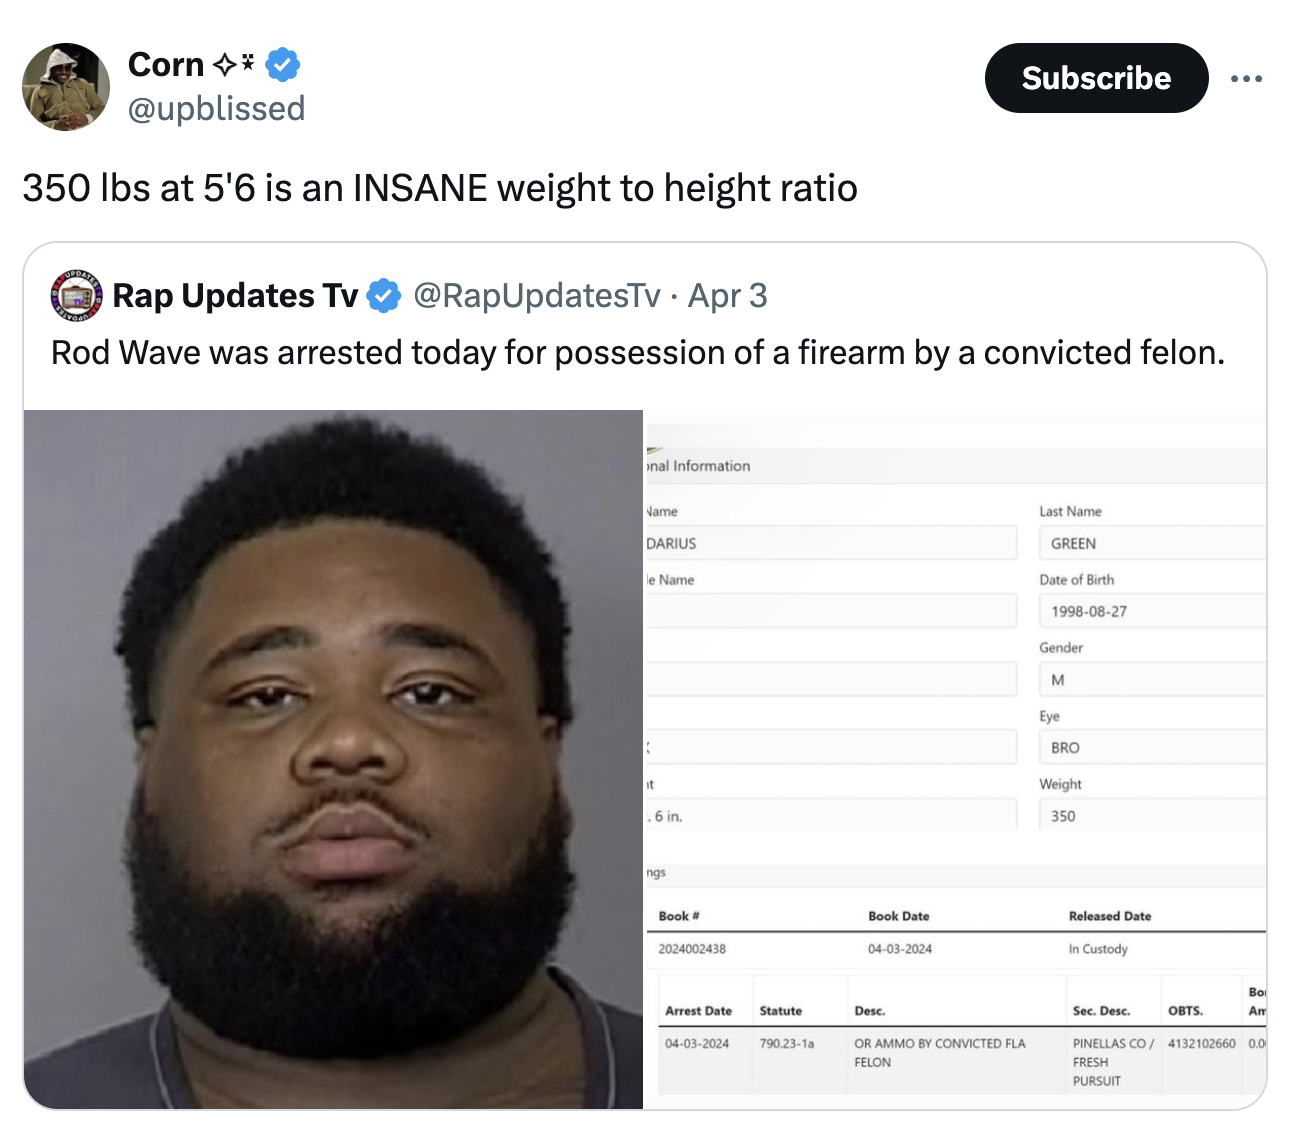 screenshot - Corn Subscribe 350 lbs at 5'6 is an Insane weight to height ratio Rap Updates Tv Apr 3 Rod Wave was arrested today for possession of a firearm by a convicted felon. al Information Darius Last Name Green Name Date of th Gender M Bro Weight 350